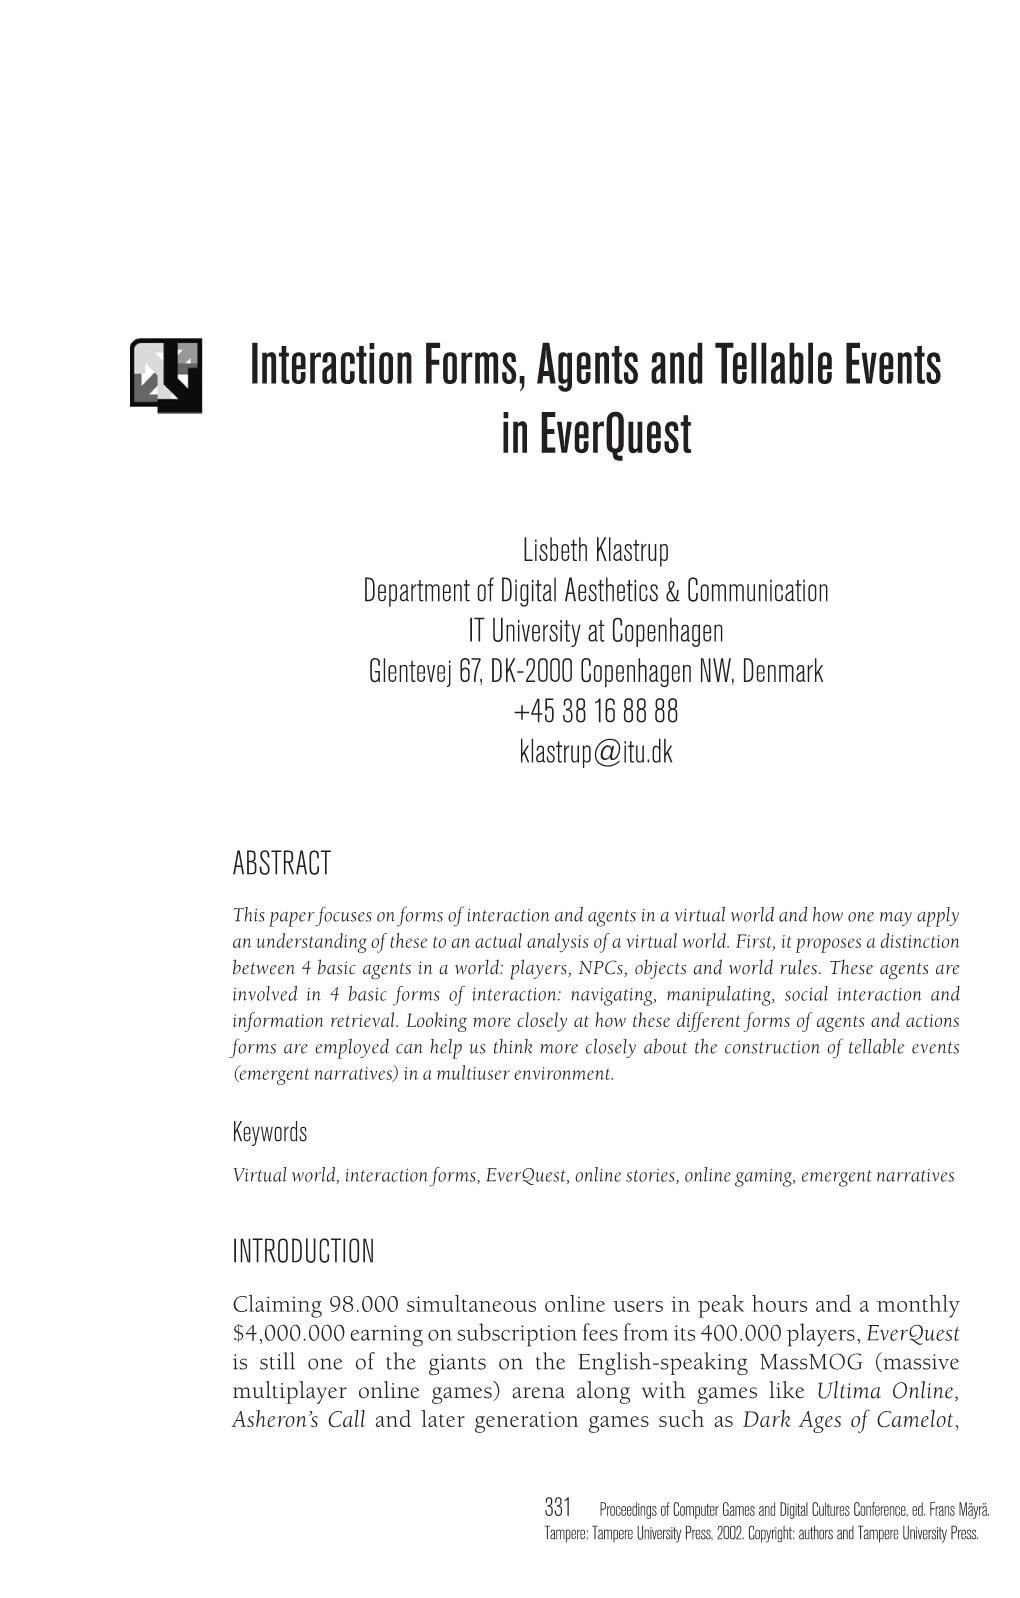 Interaction Forms, Agents and Tellable Events in Everquest